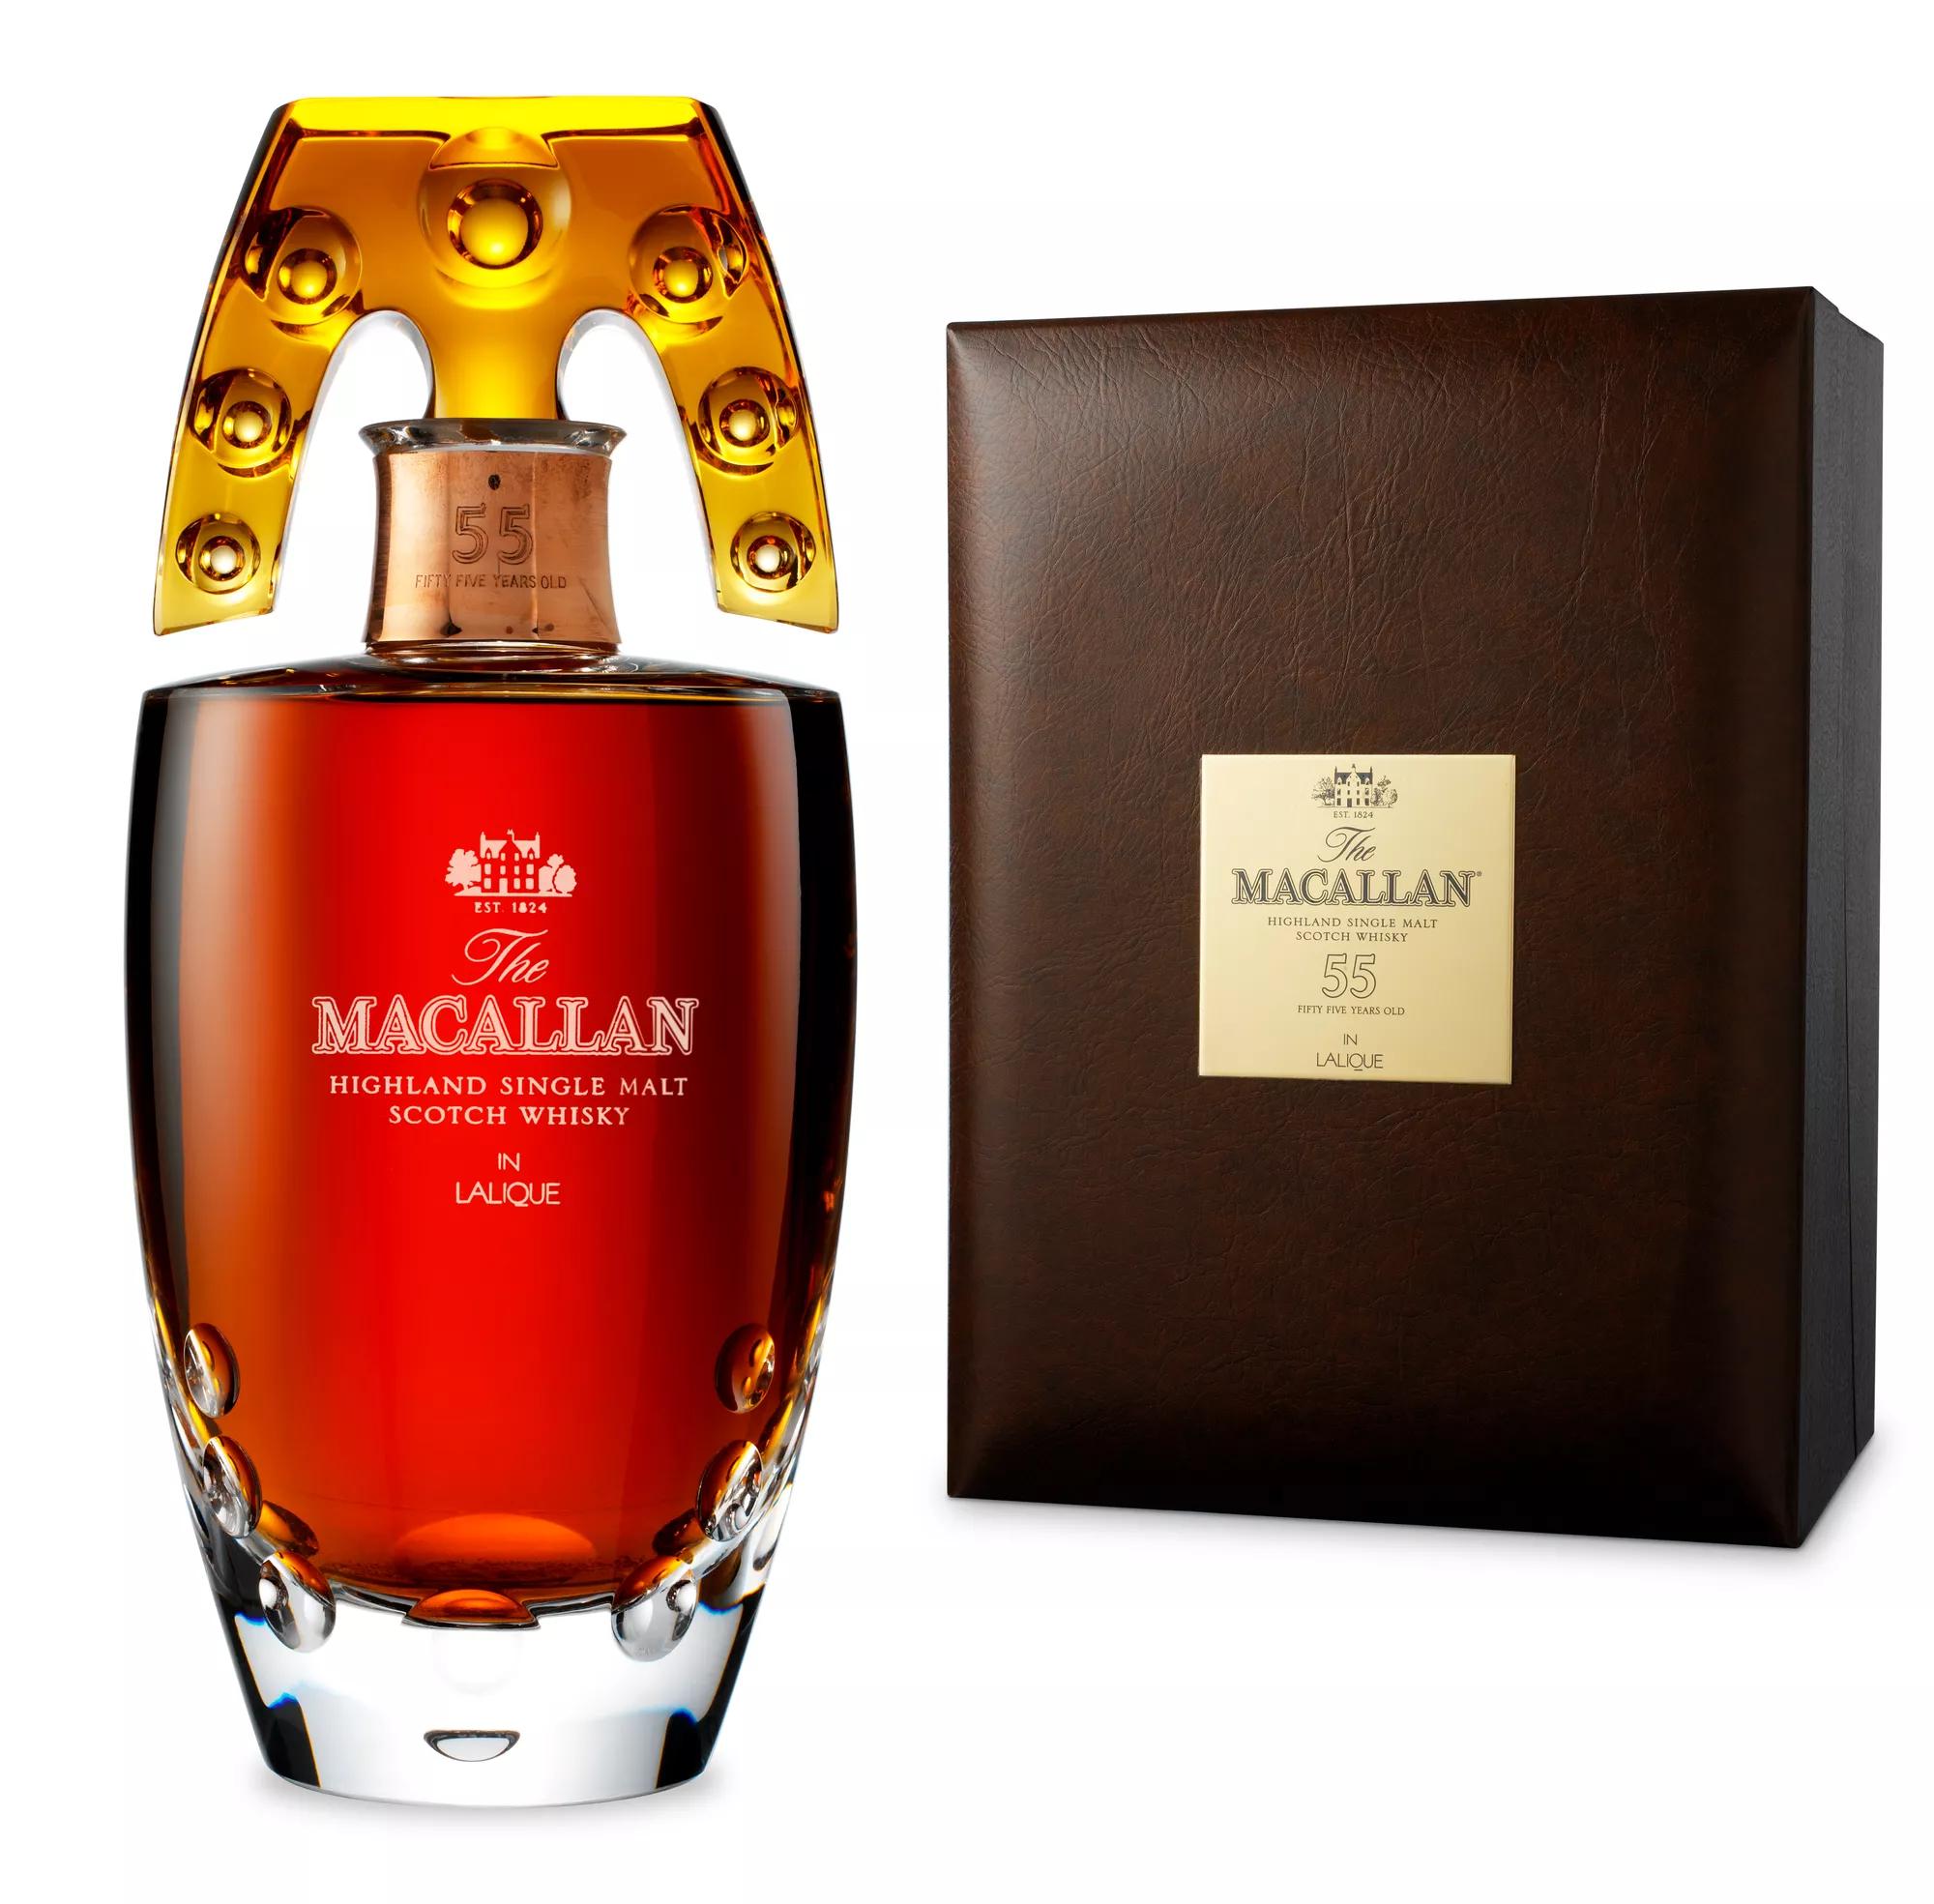 The Macallan in Lalique 55 Years Old | The Macallan®